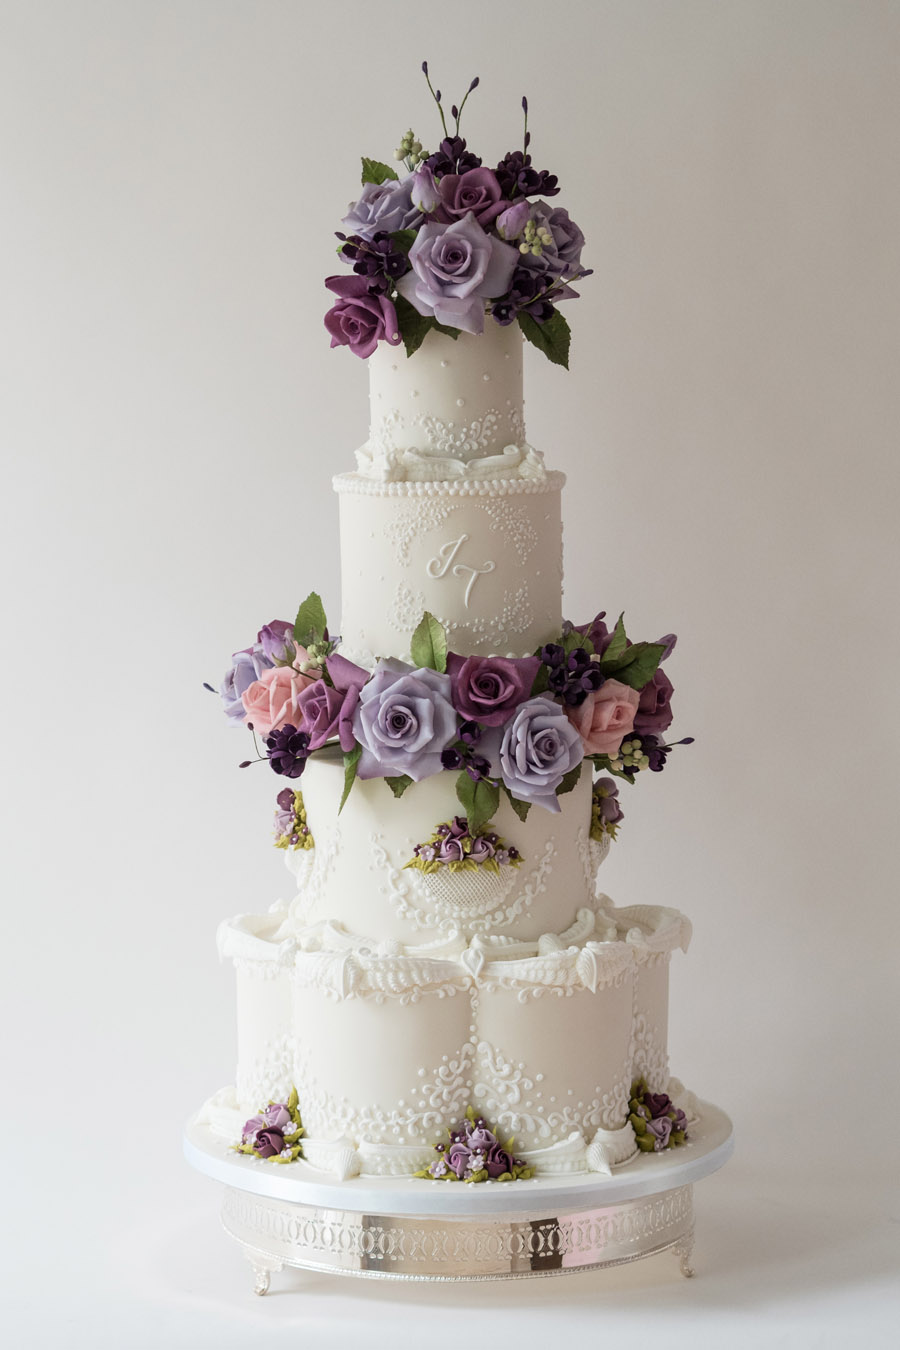 Beautiful wedding cakes by The Frostery - trends and ideas for 2019 (21)